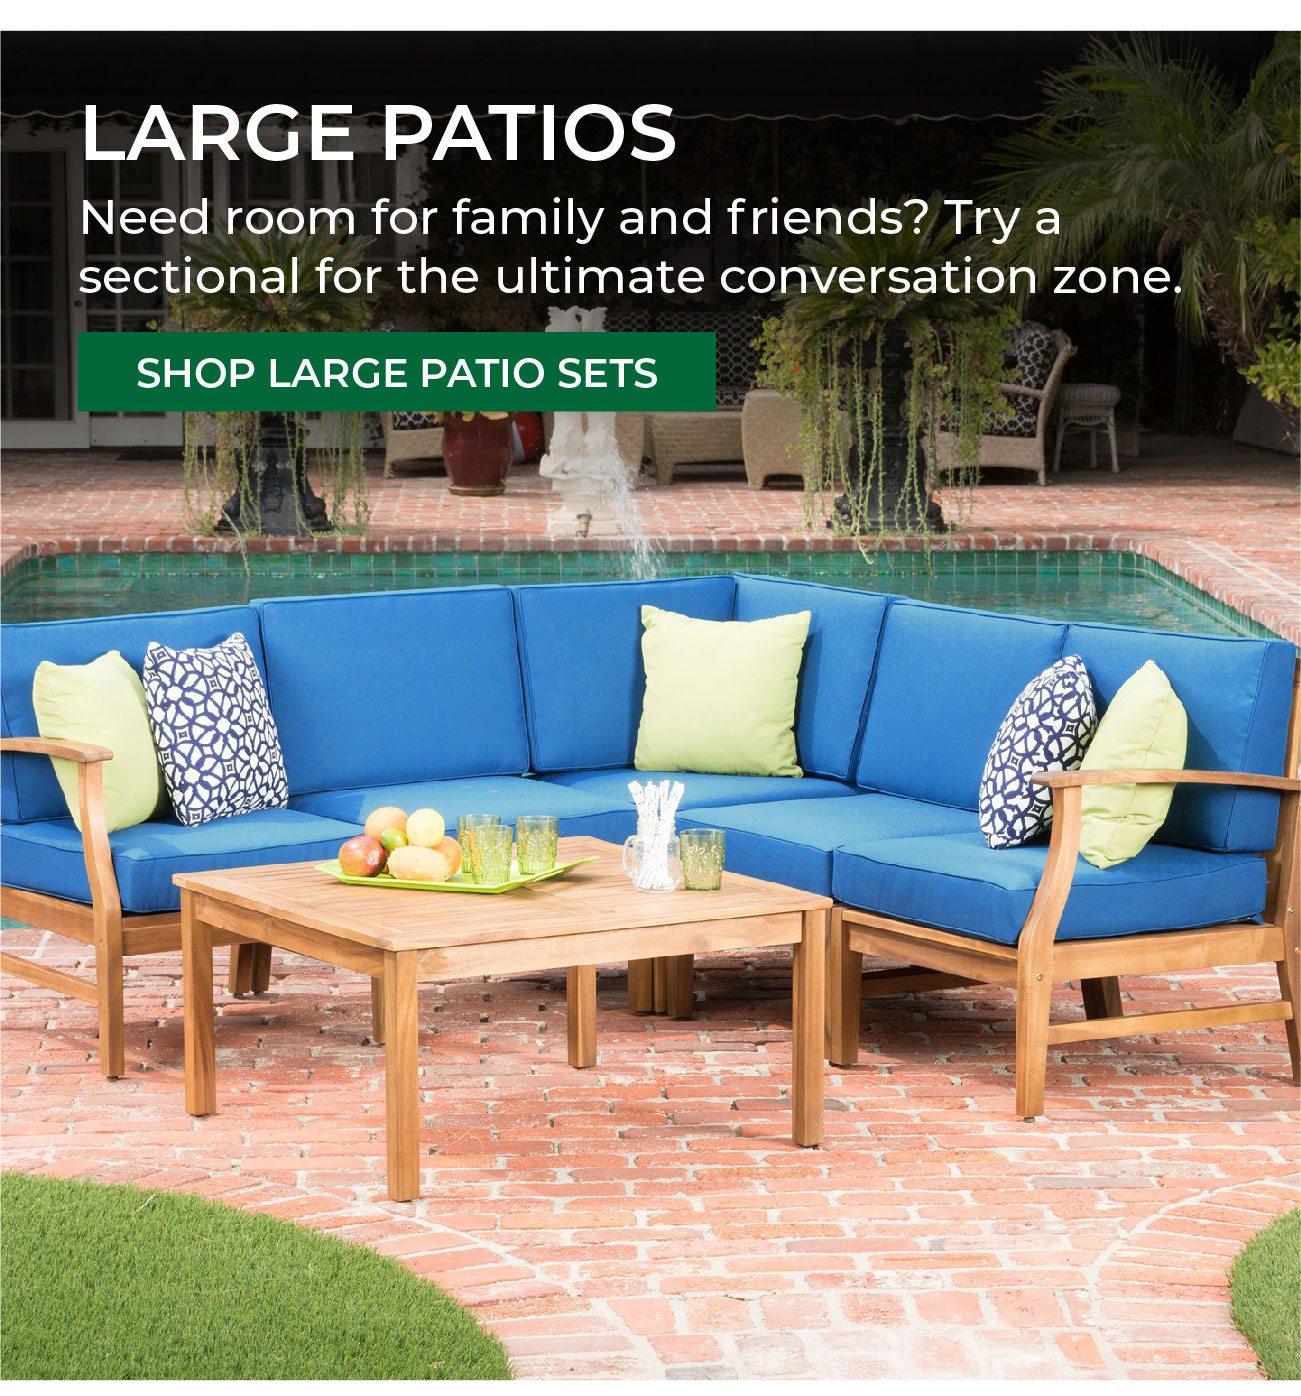 For Large Patios